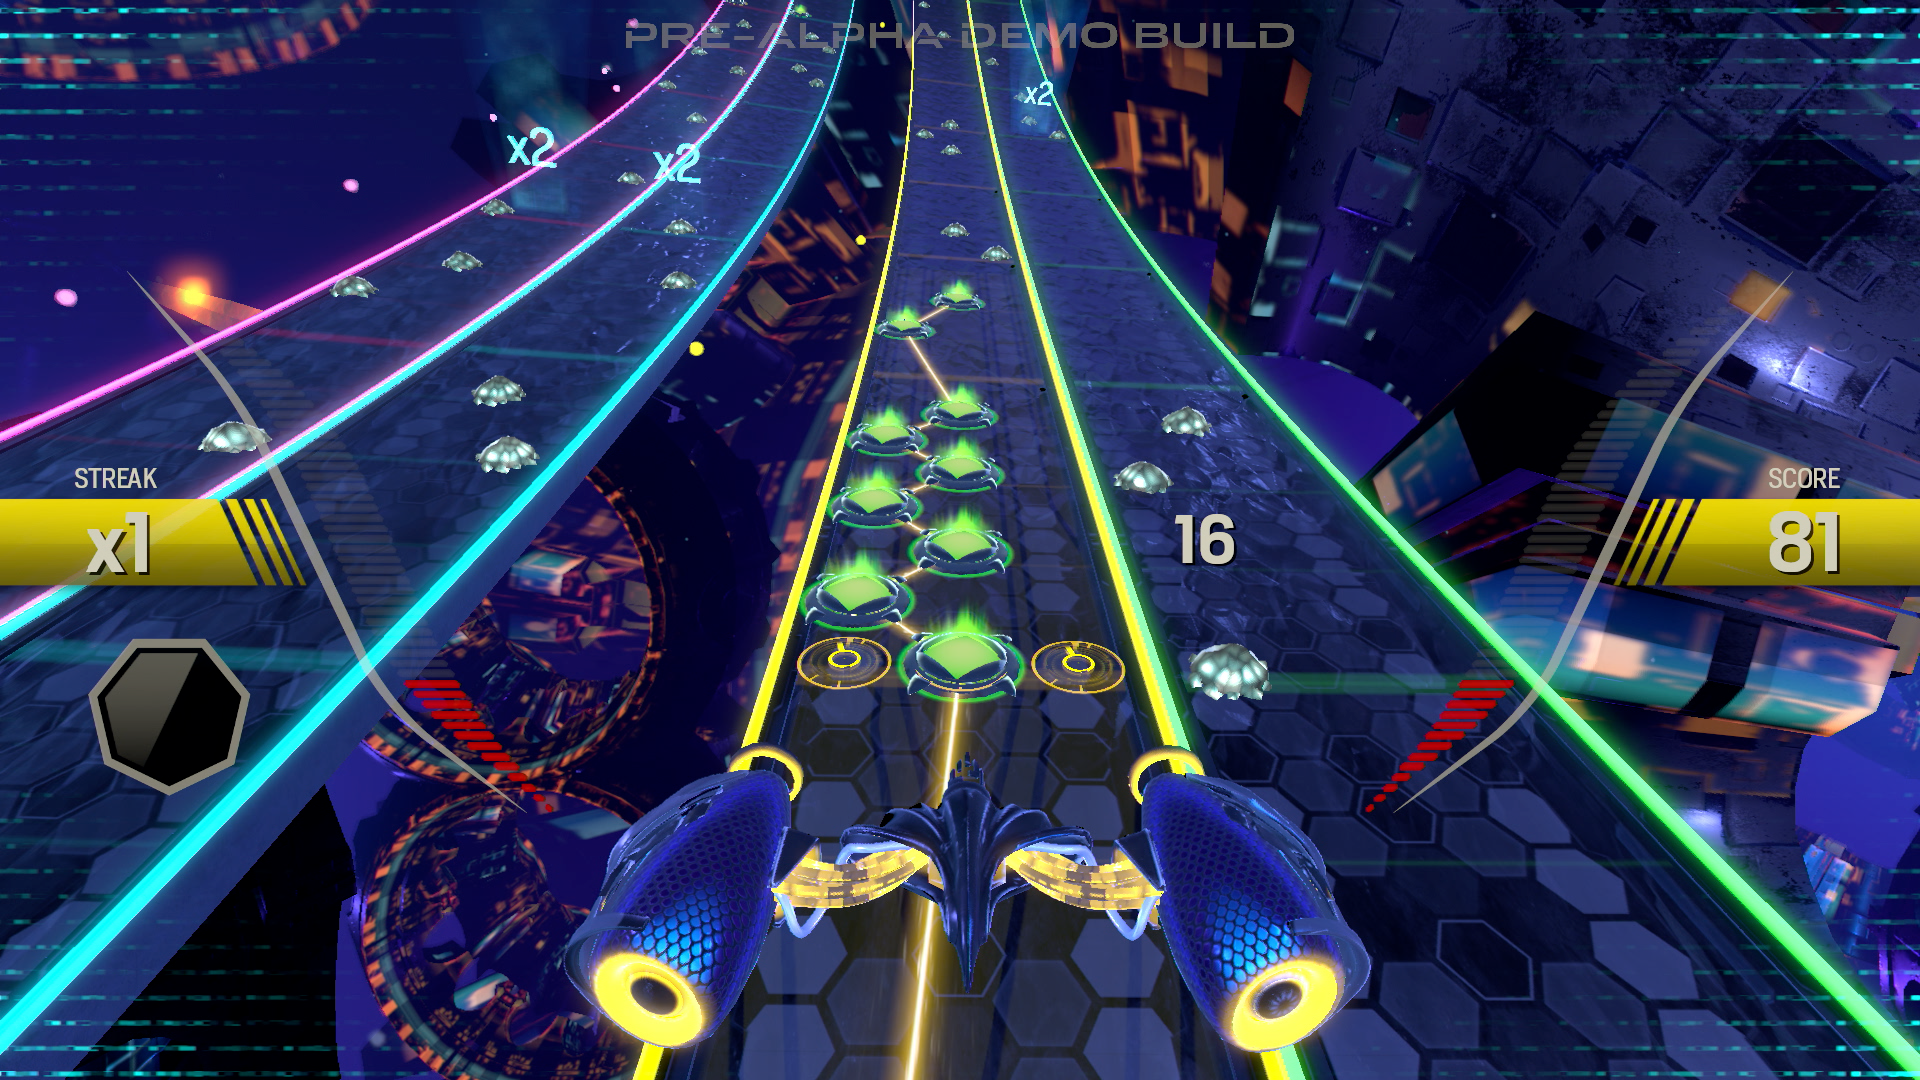 metal strubehoved sangtekster Amplitude Has Been Delayed to January 2016